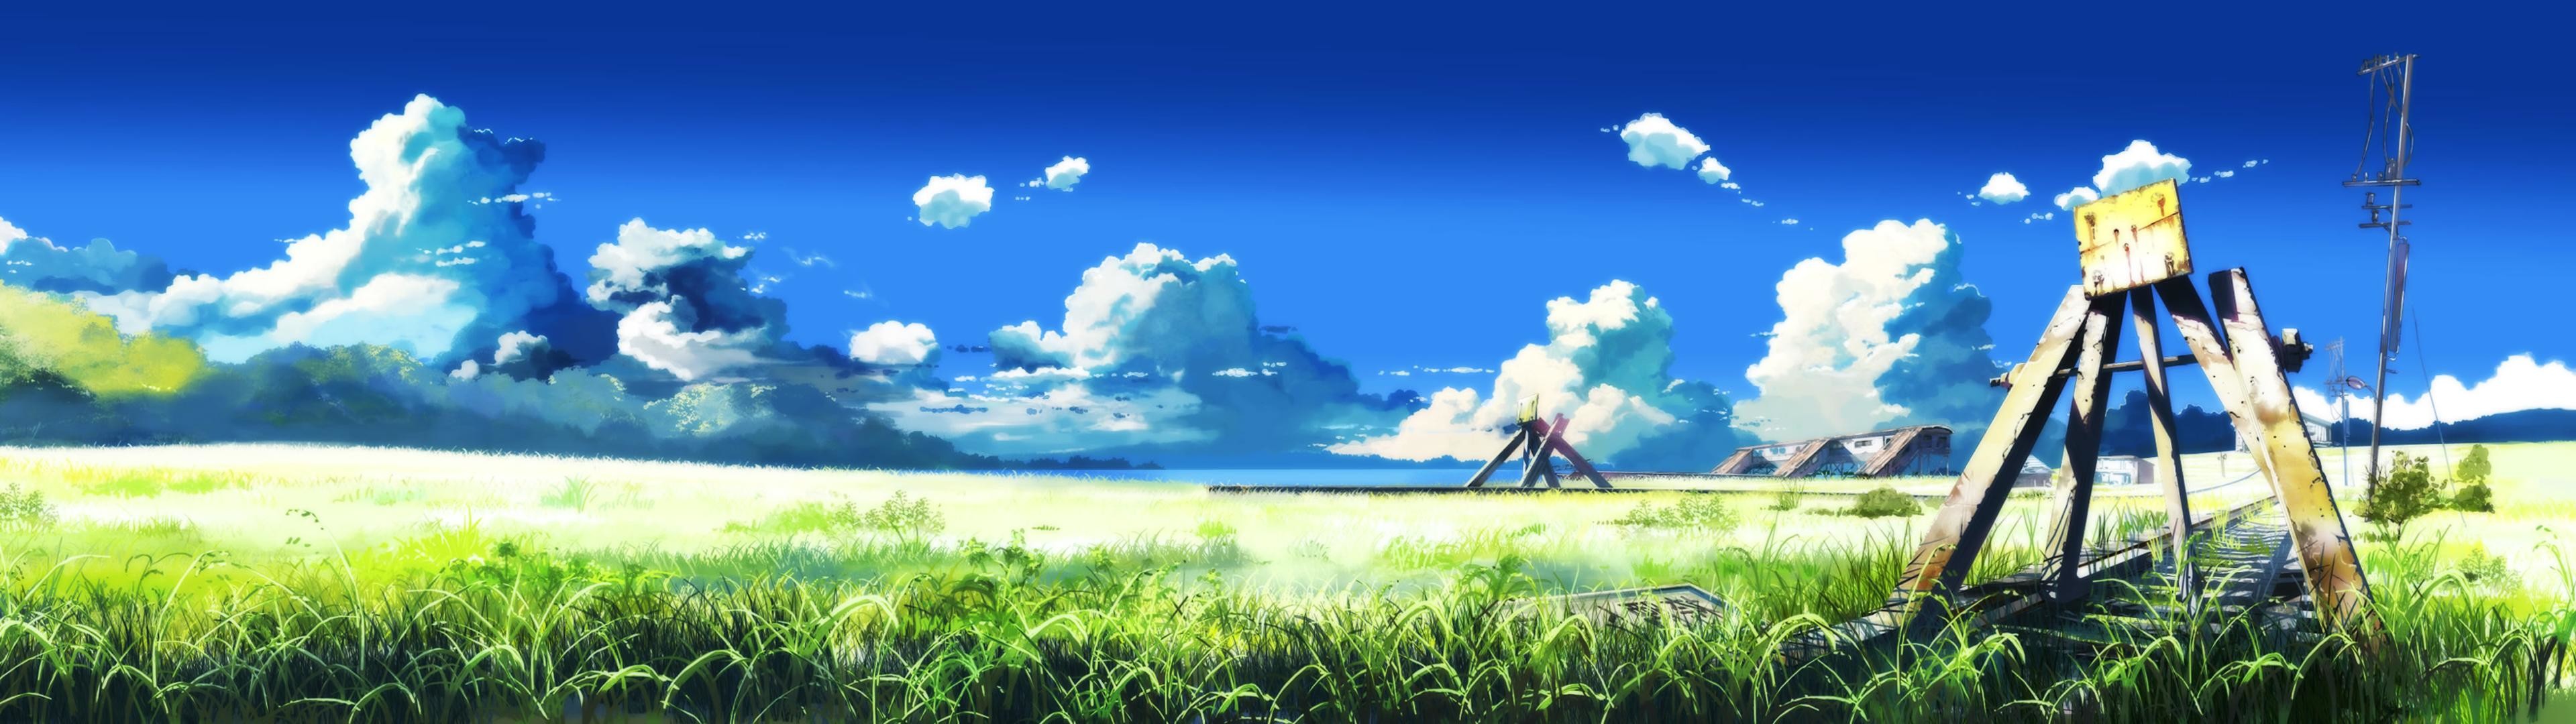 3840x1080 Best Anime Dual Monitor HD Pictures.